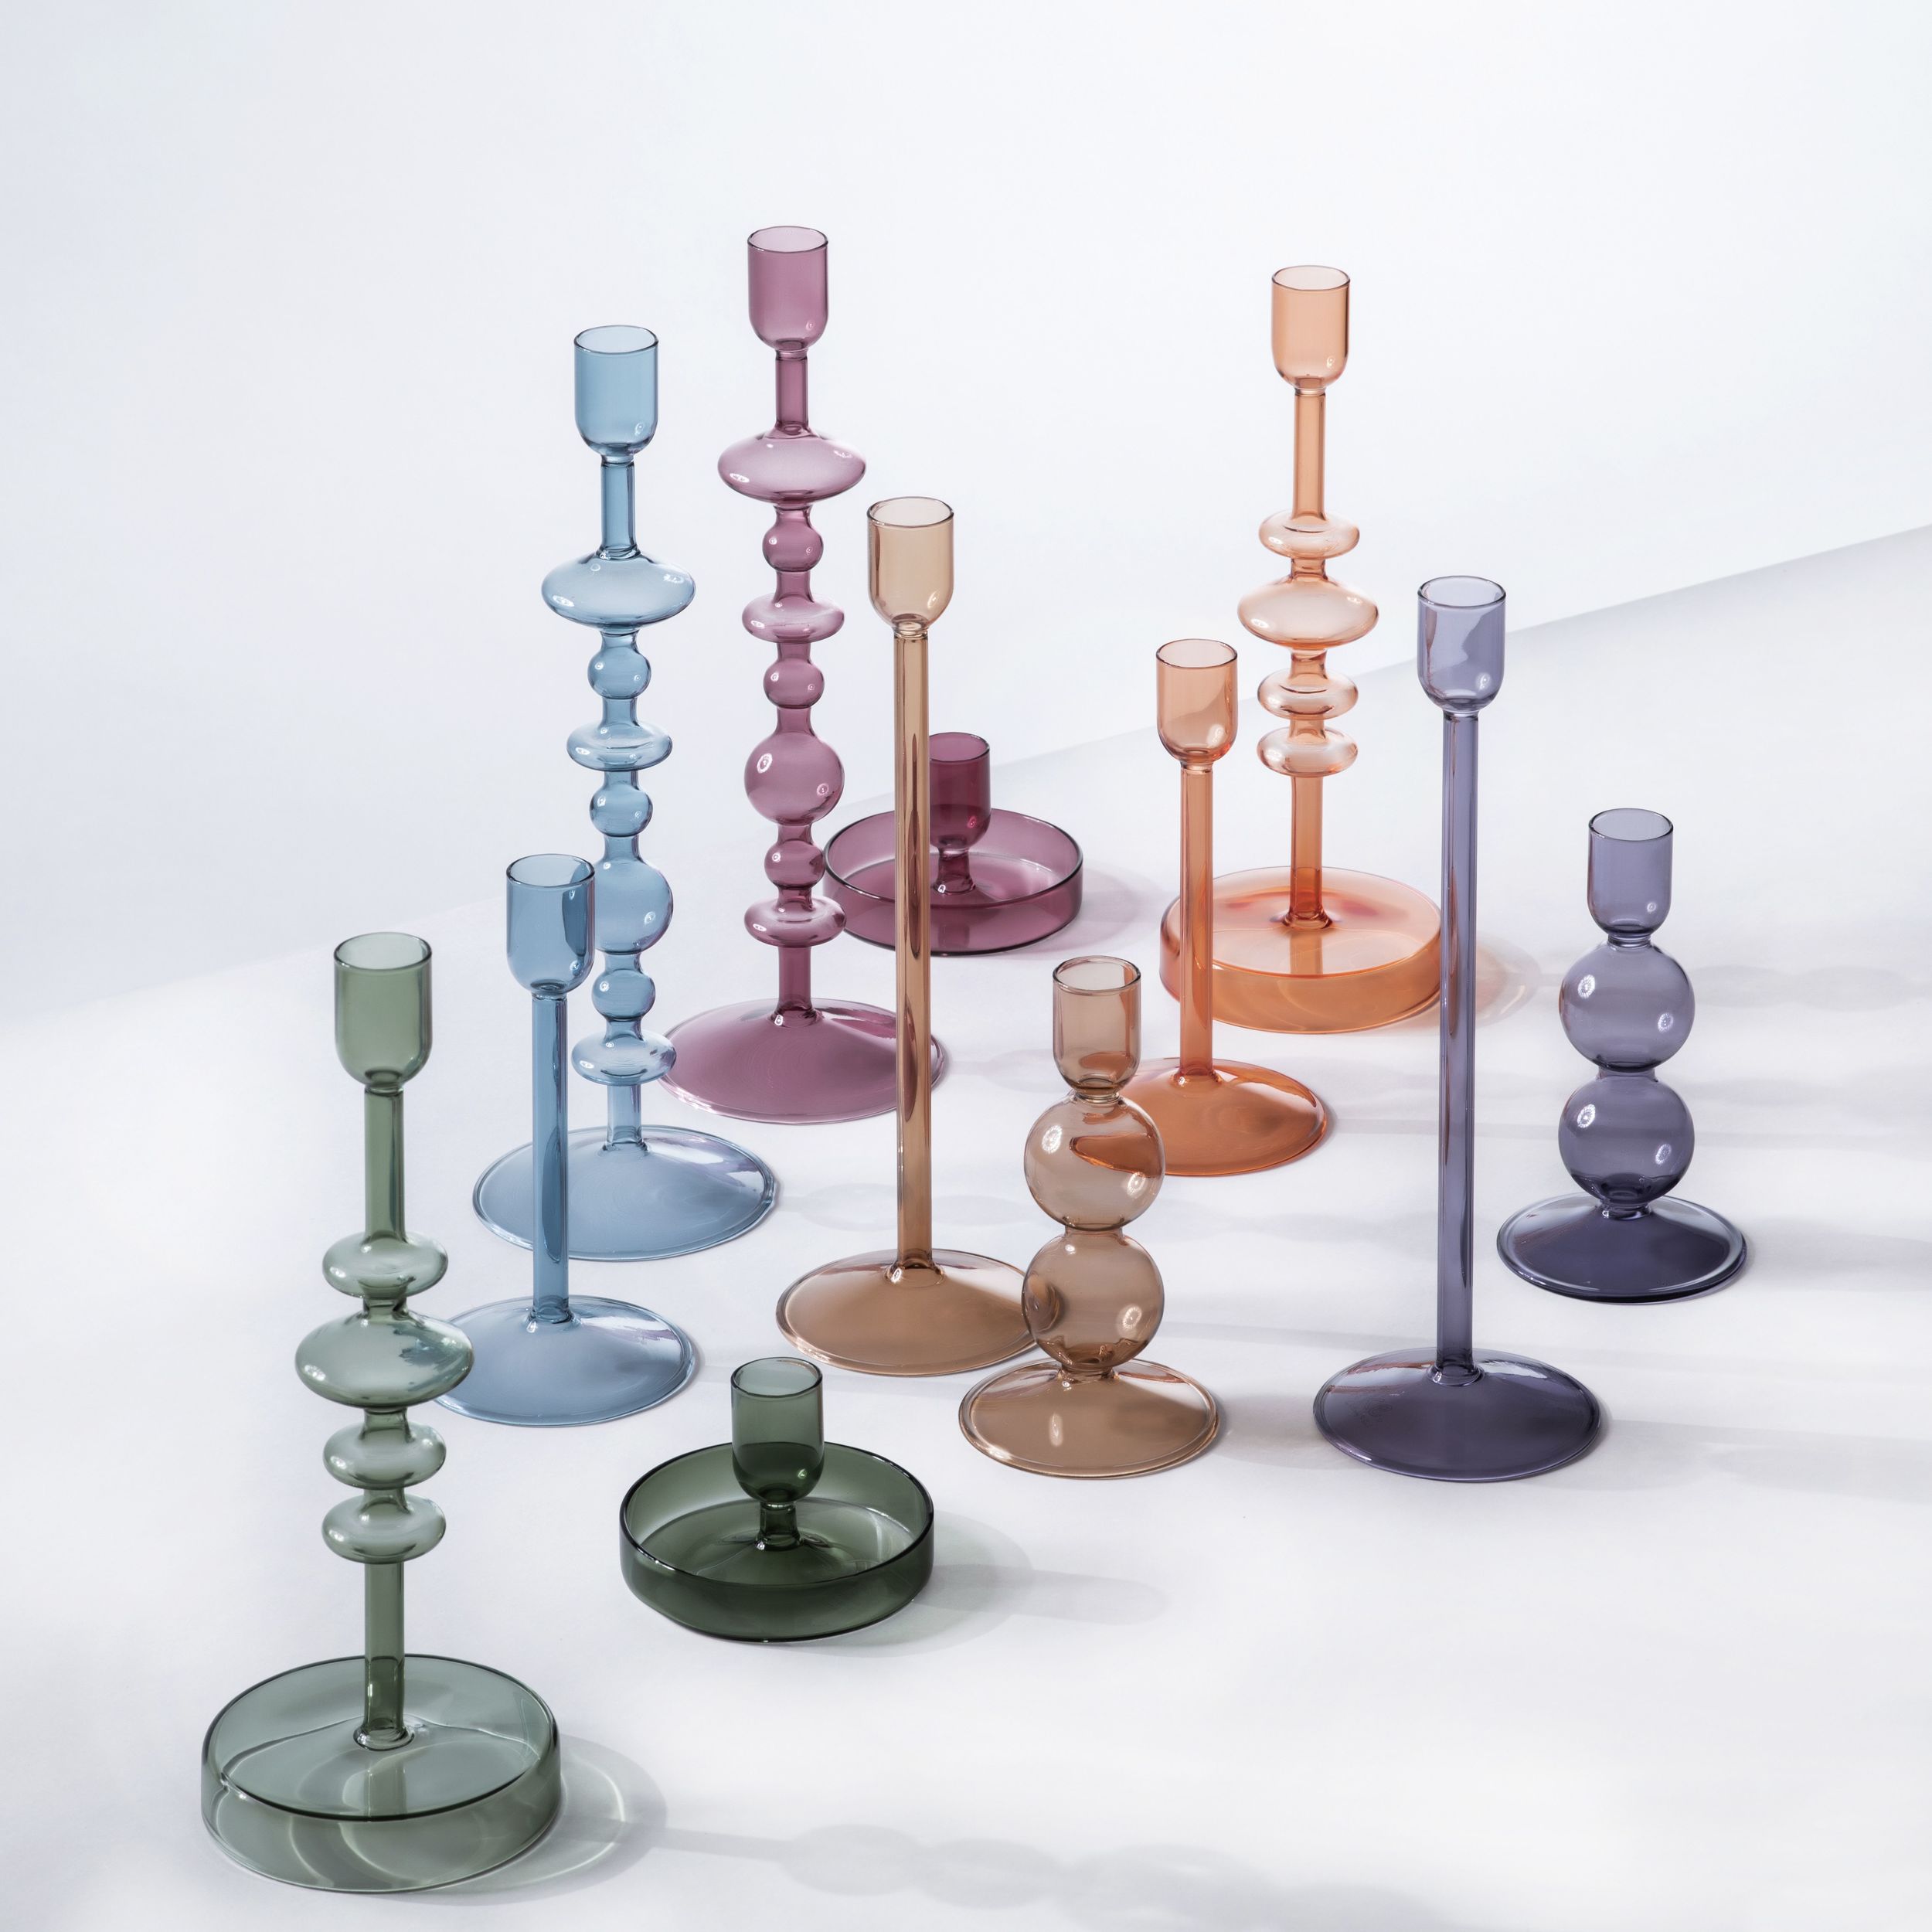 Like Home candle holder - like. by Villeroy & Boch